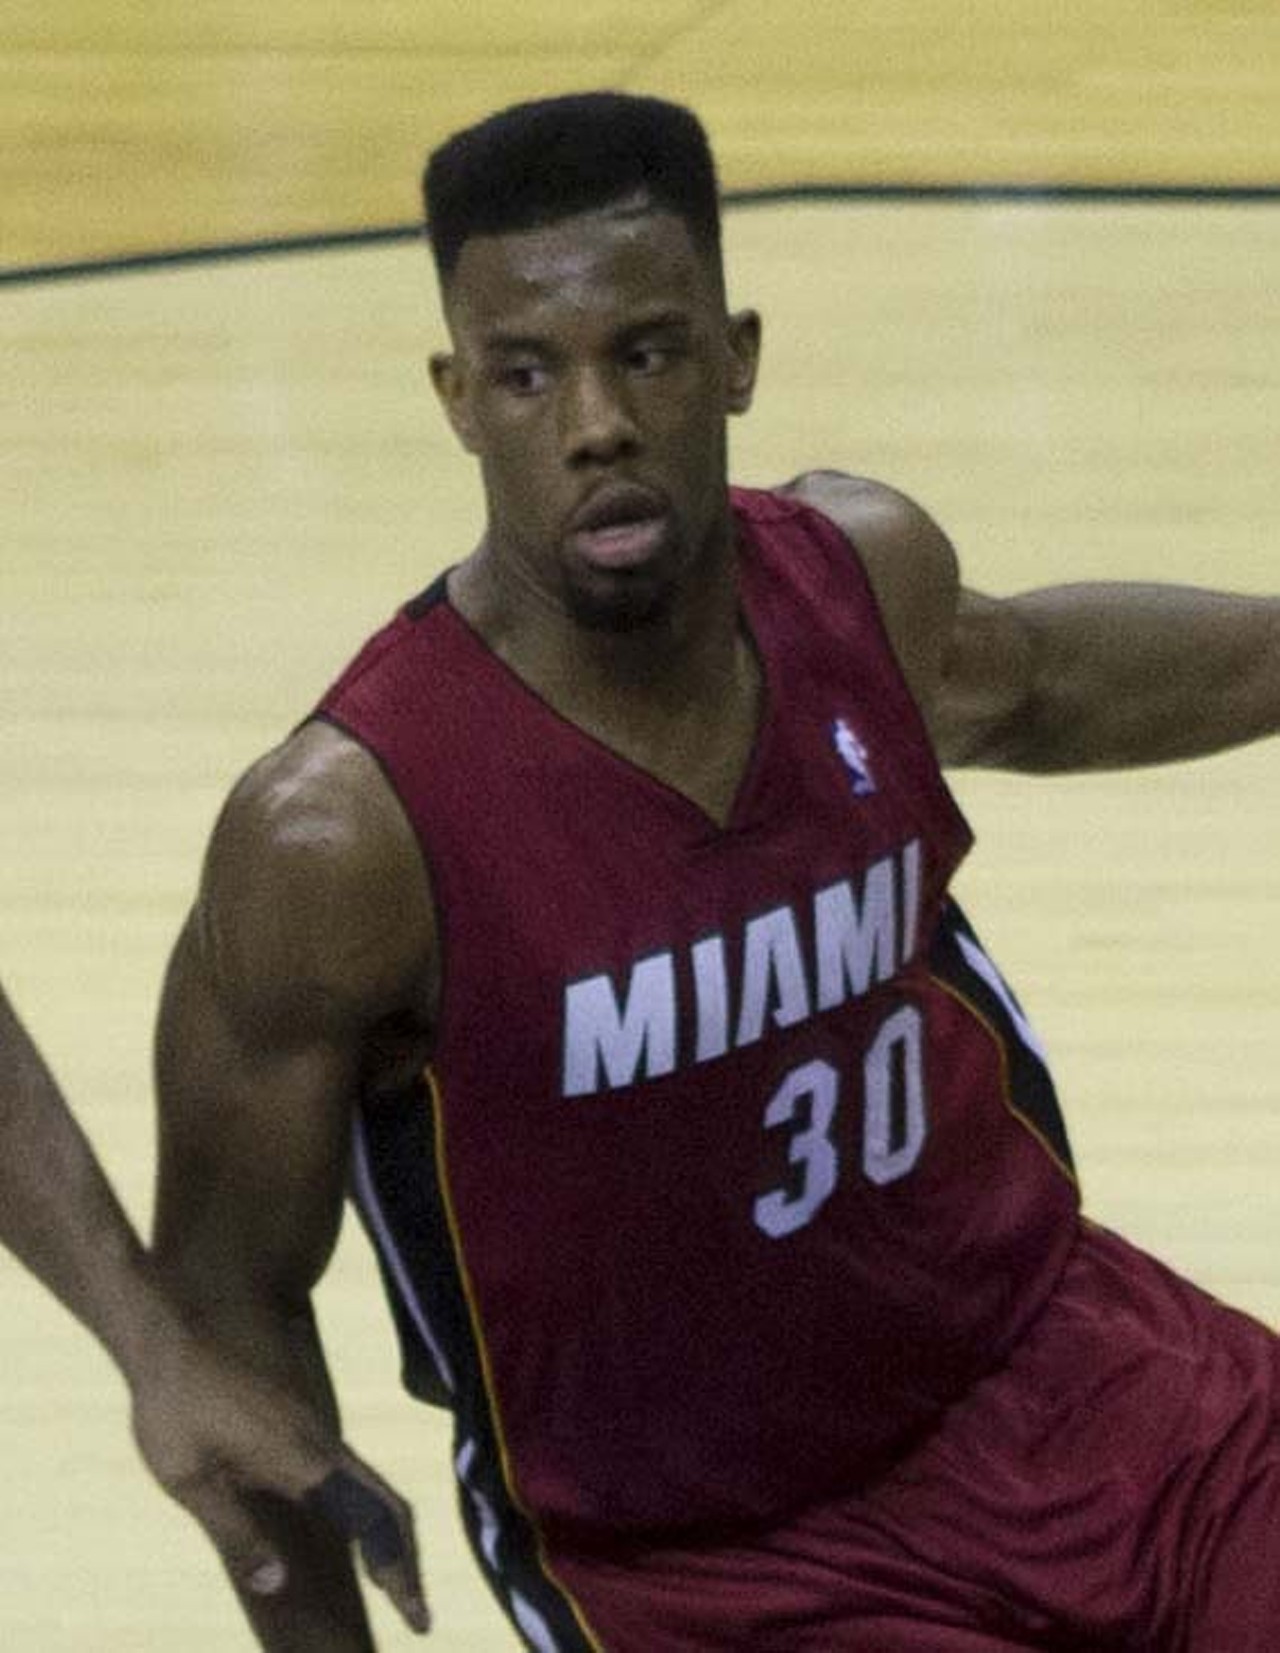 Known for his flat-top haircut, Norris Cole attended CSU from 2007 to 2011 and was drafted by the NBA’s Miami Heat after a historic senior year. CSU Coach Gary Waters recruited Cole from Dayton and Cole became, arguably, the greatest CSU basketball product of all time. He has been in the NBA three years, and has two NBA championships — as many as LeBron James — to show for it.